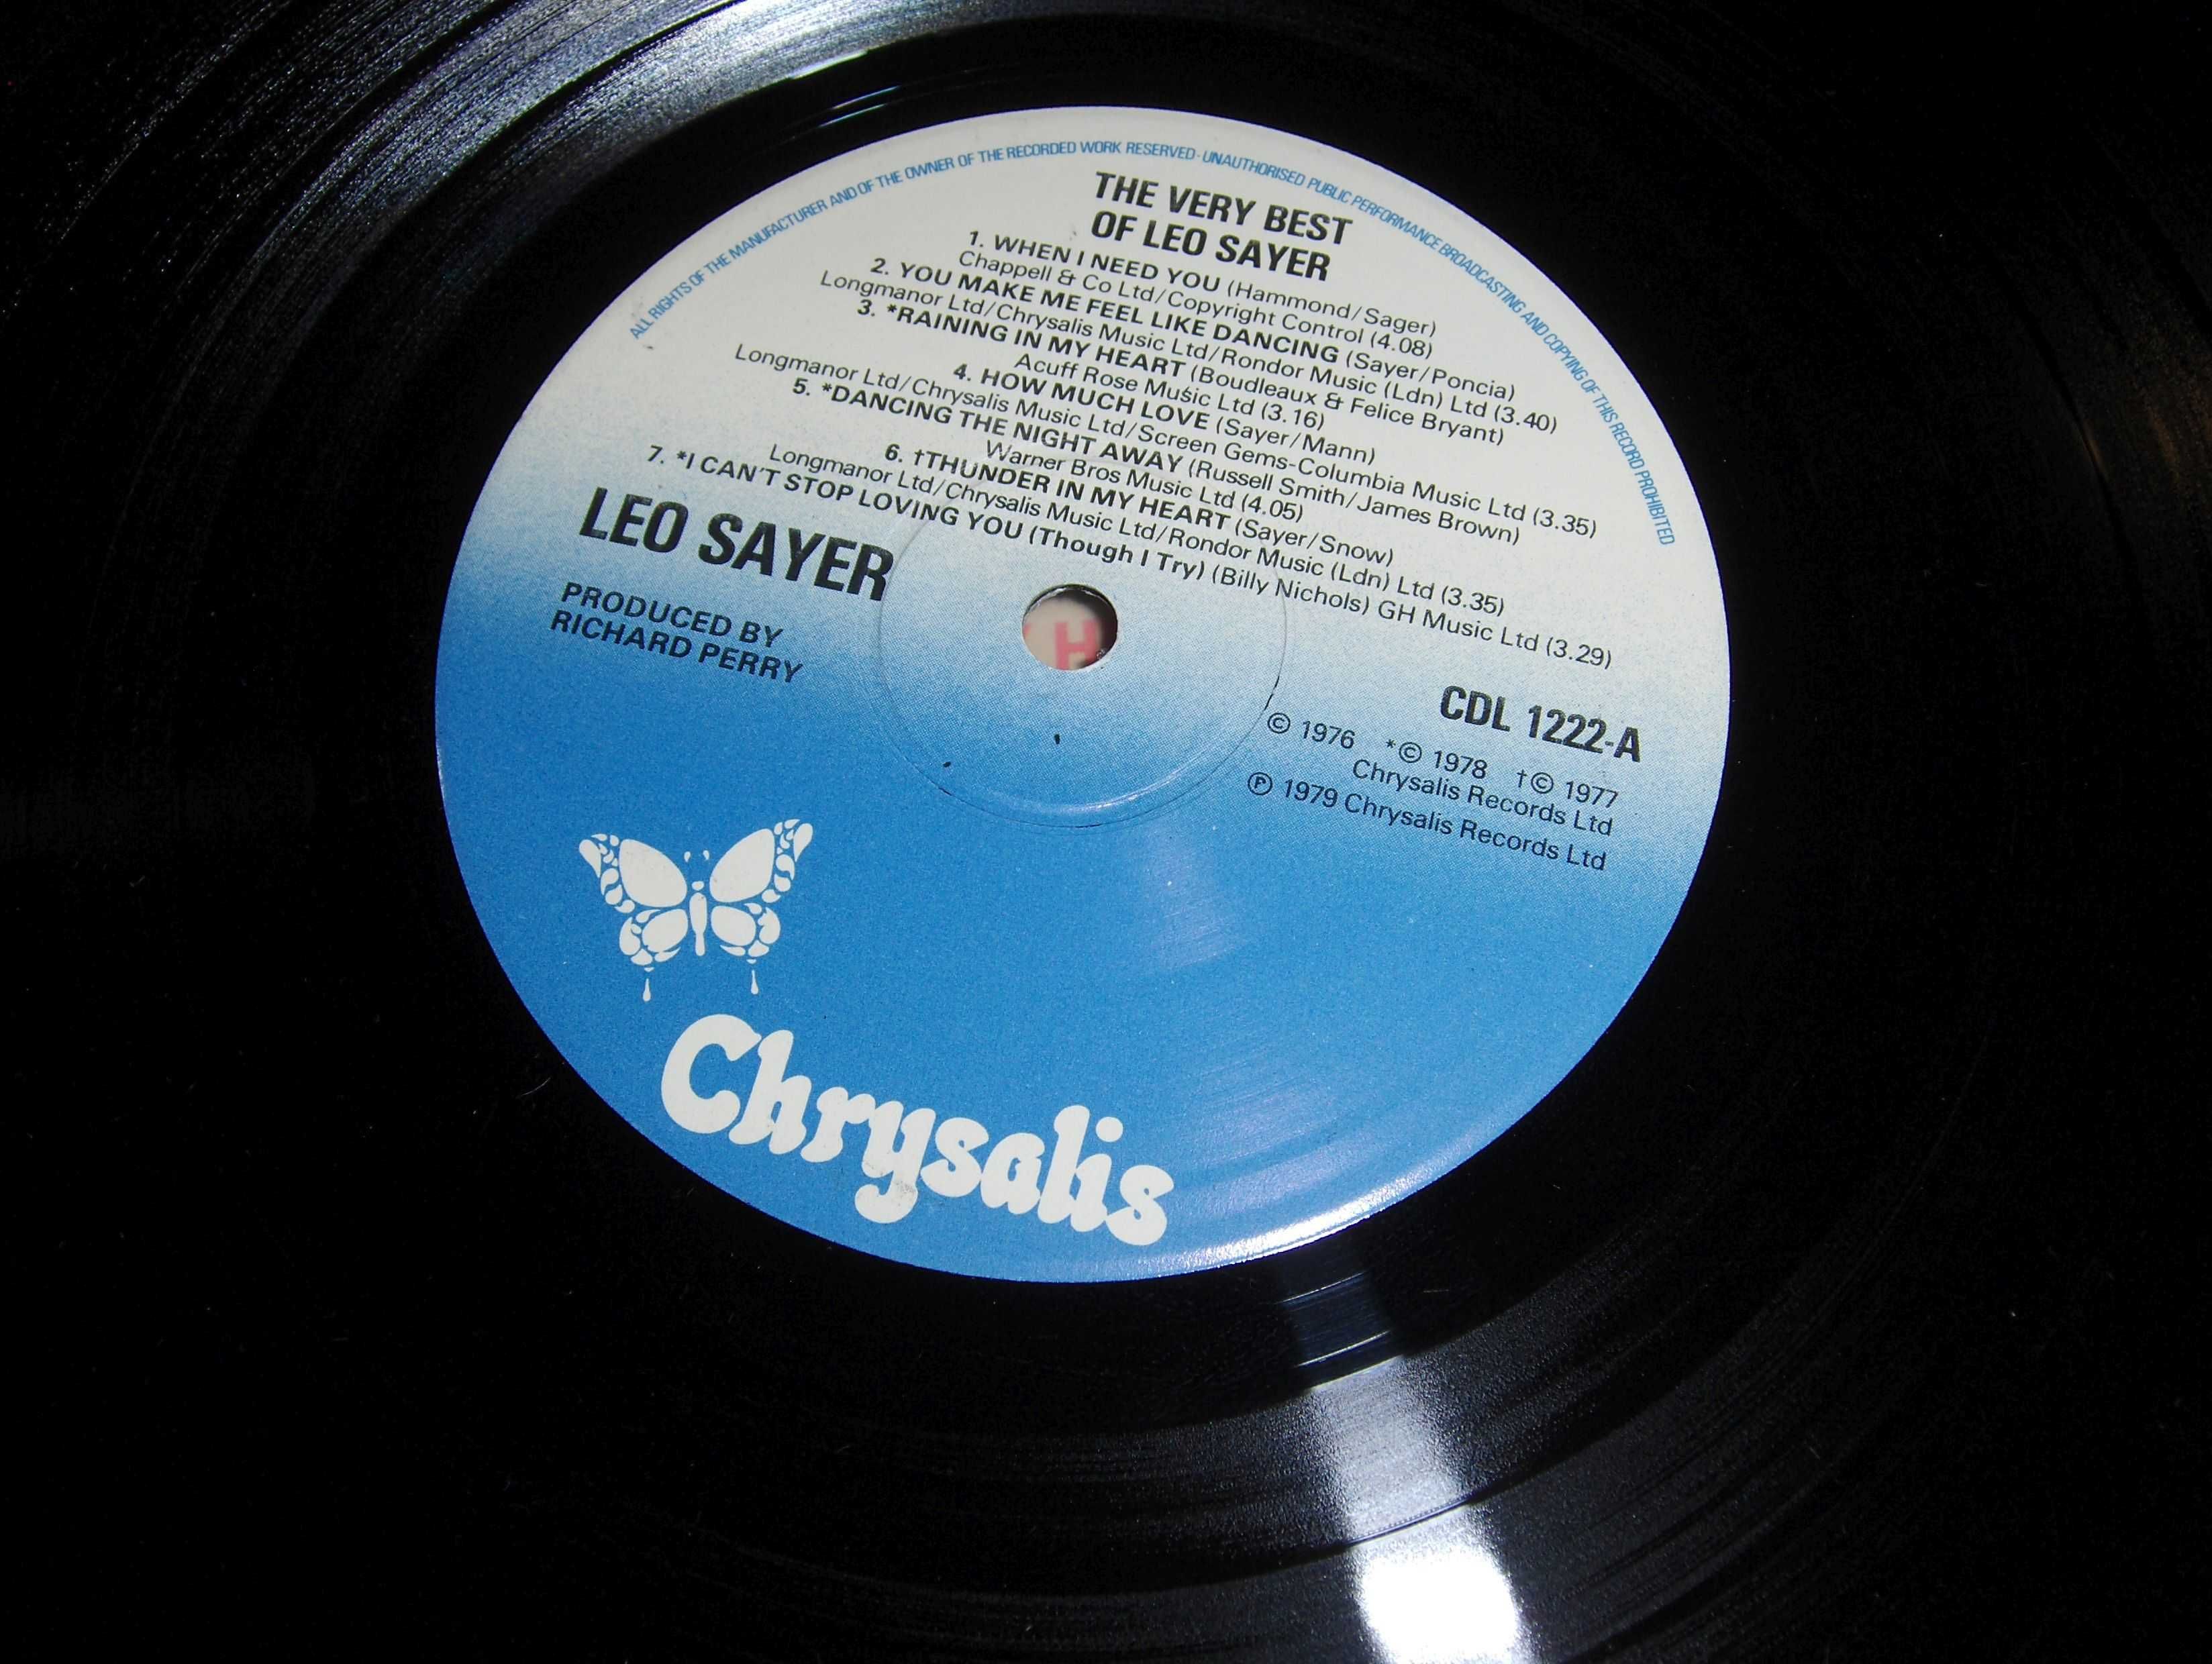 Leo Sayer - The Very Best Of 1978 VG + wyd.UK